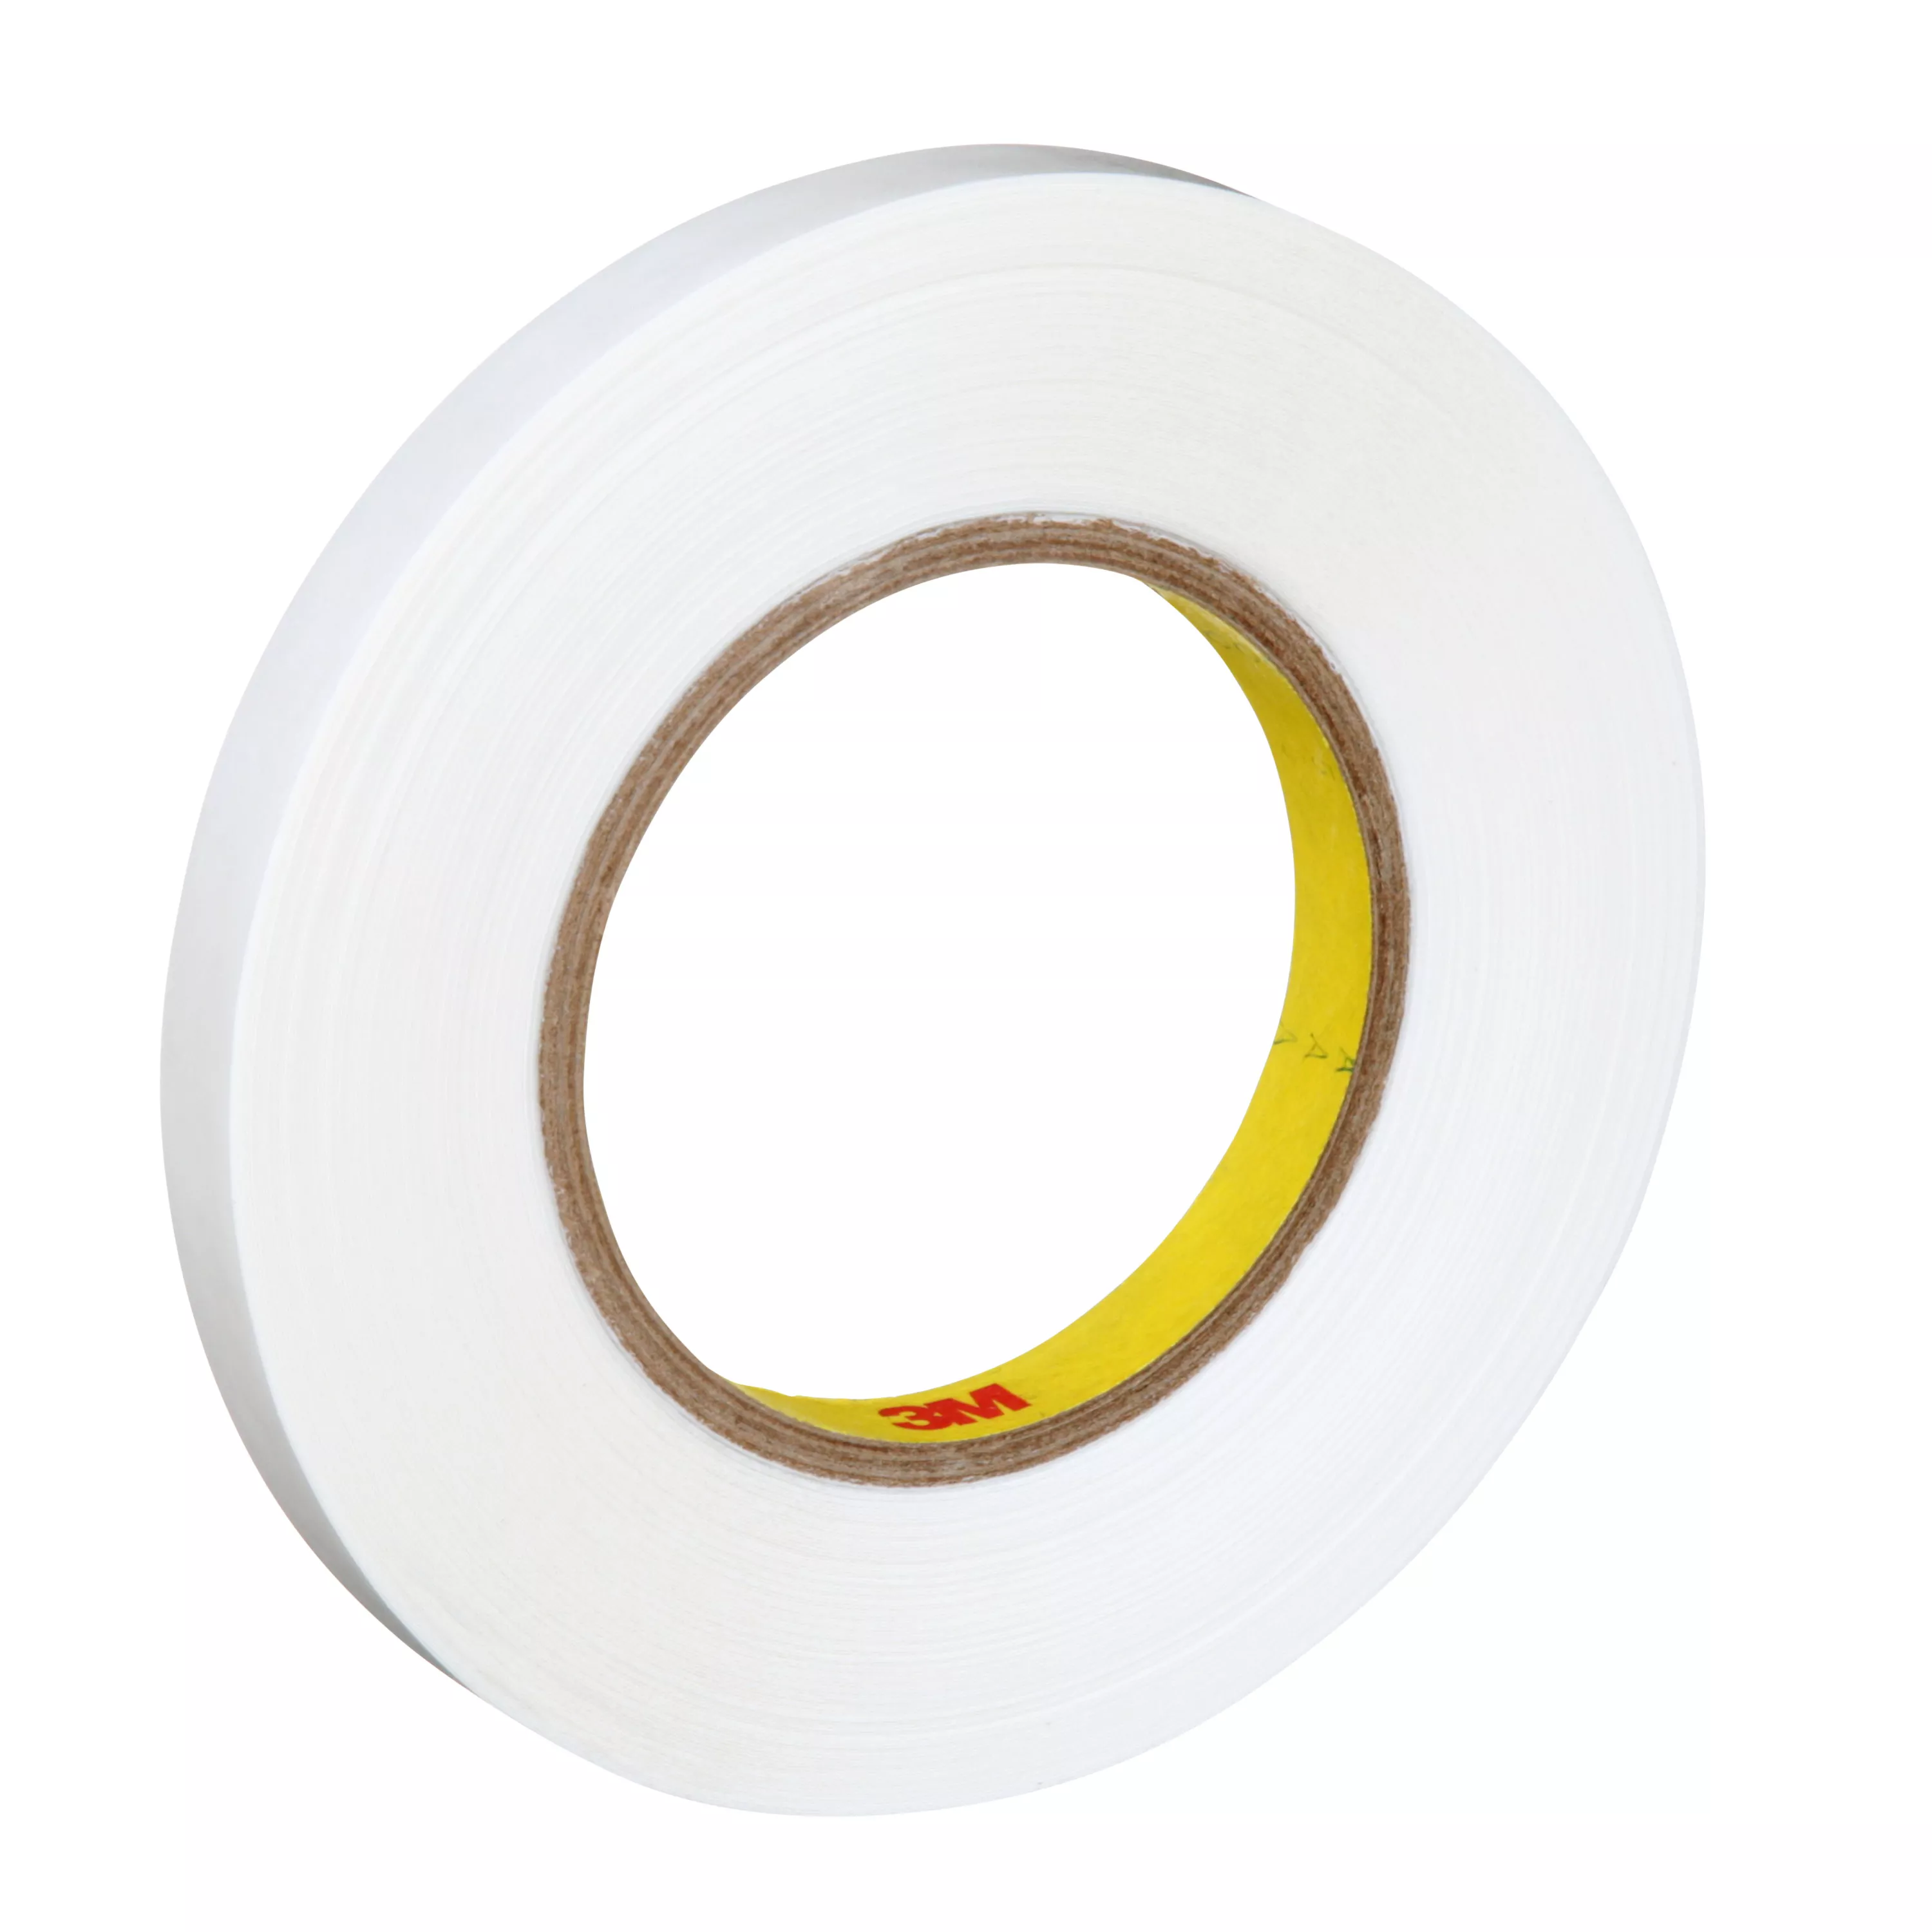 3M™ Double Coated Tape 9579, White, 1/2 in x 36 yd, 9 mil, 72 Roll/Case